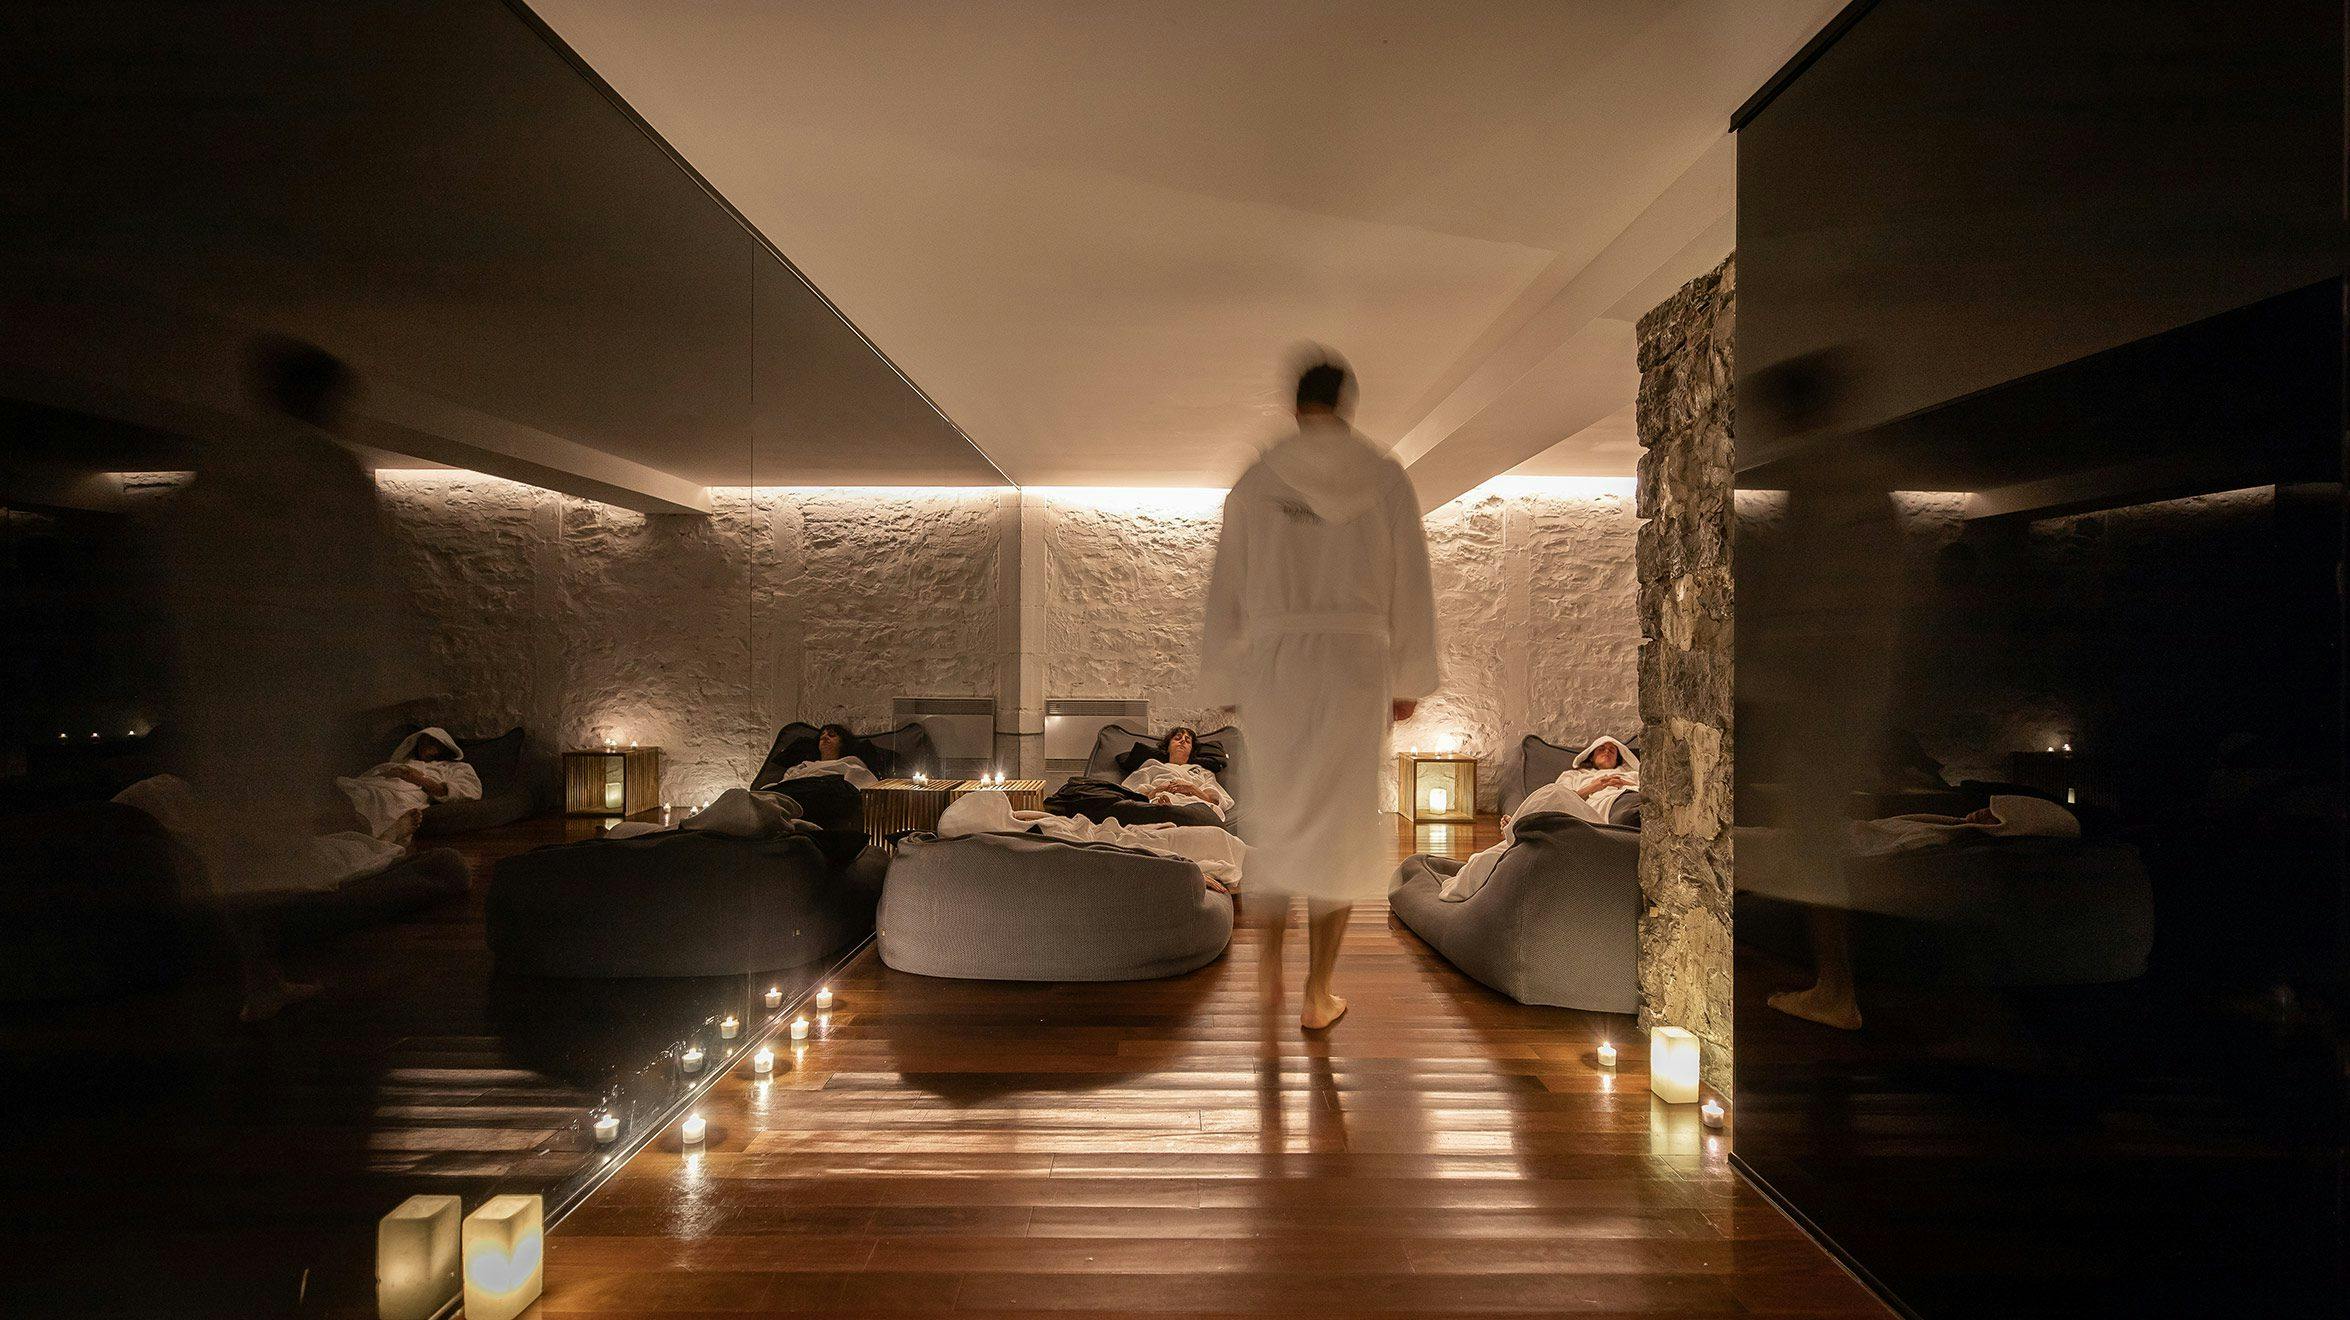 Man walking through stylish relaxation area, part of the thermal therapy journey in Old Montreal at Scandinave Spa Vieux-Montréal